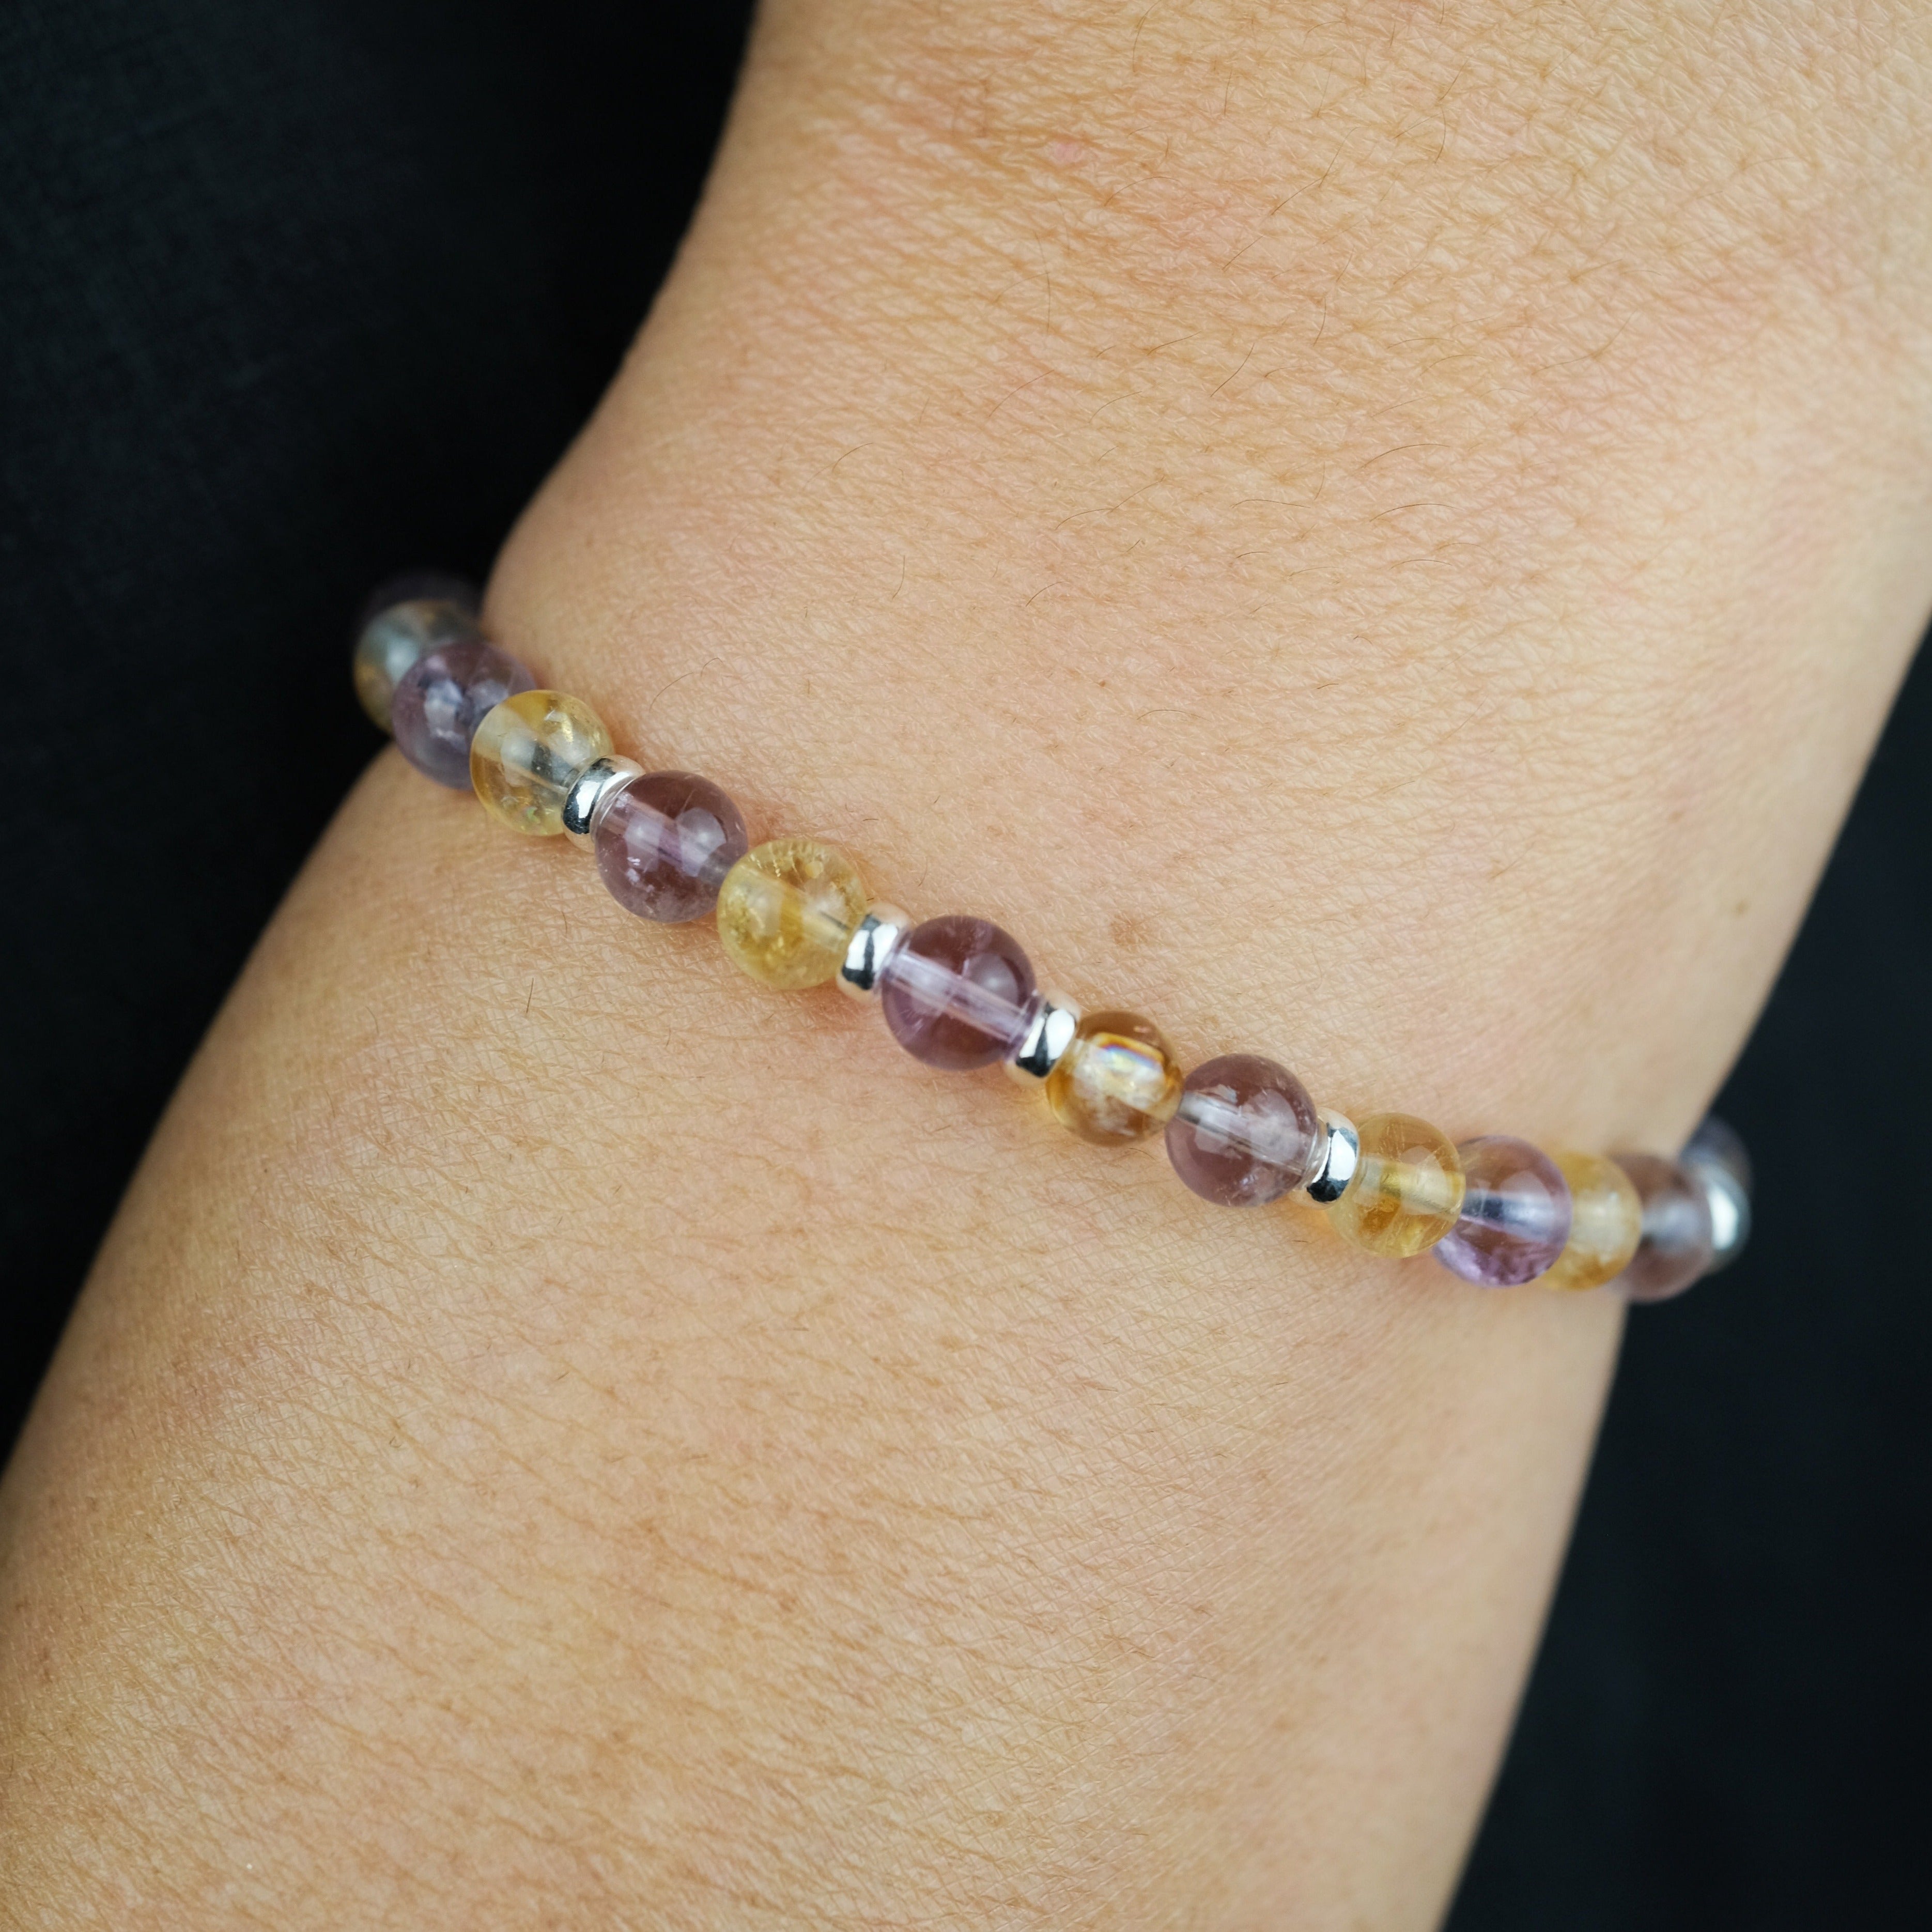 A model wearing an Amethyst and citrine gemstone bracelet with 925 sterling silver accessories